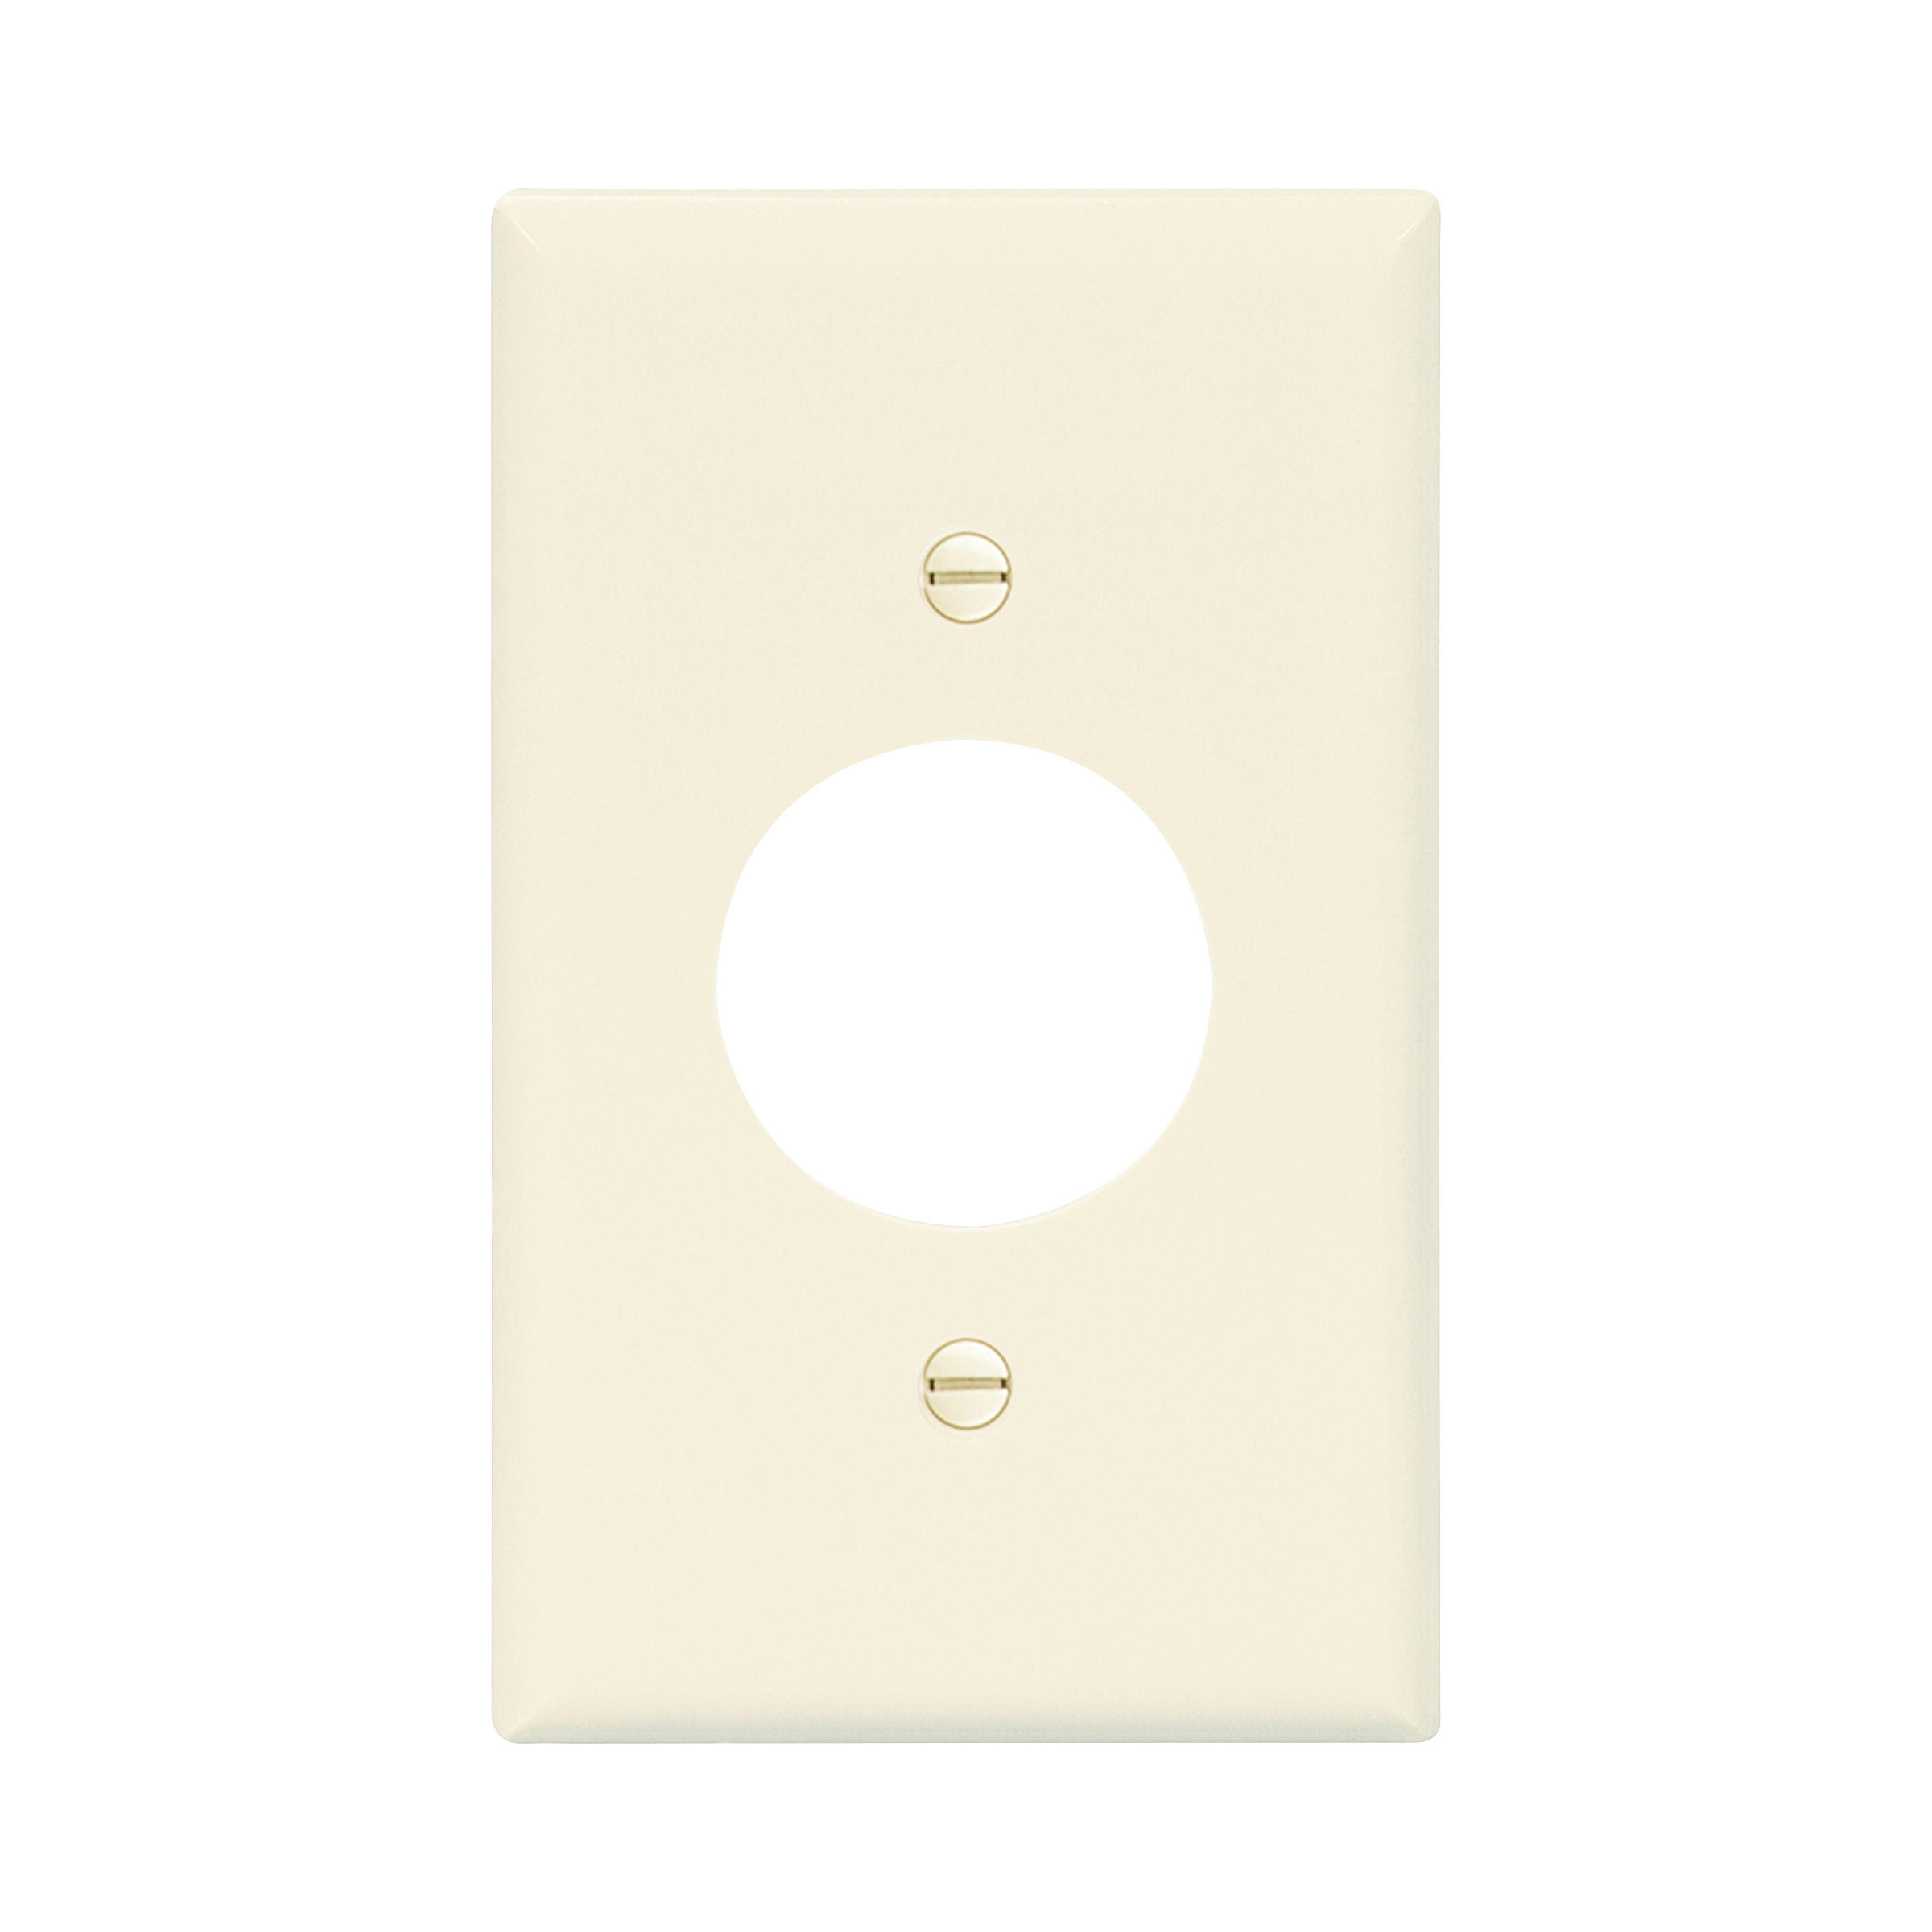 Eaton Power Outlet And Locking, Lt. Almond, 1.40" Hole Cutout, Polycarbonate, Single-Gang, Mid-Size